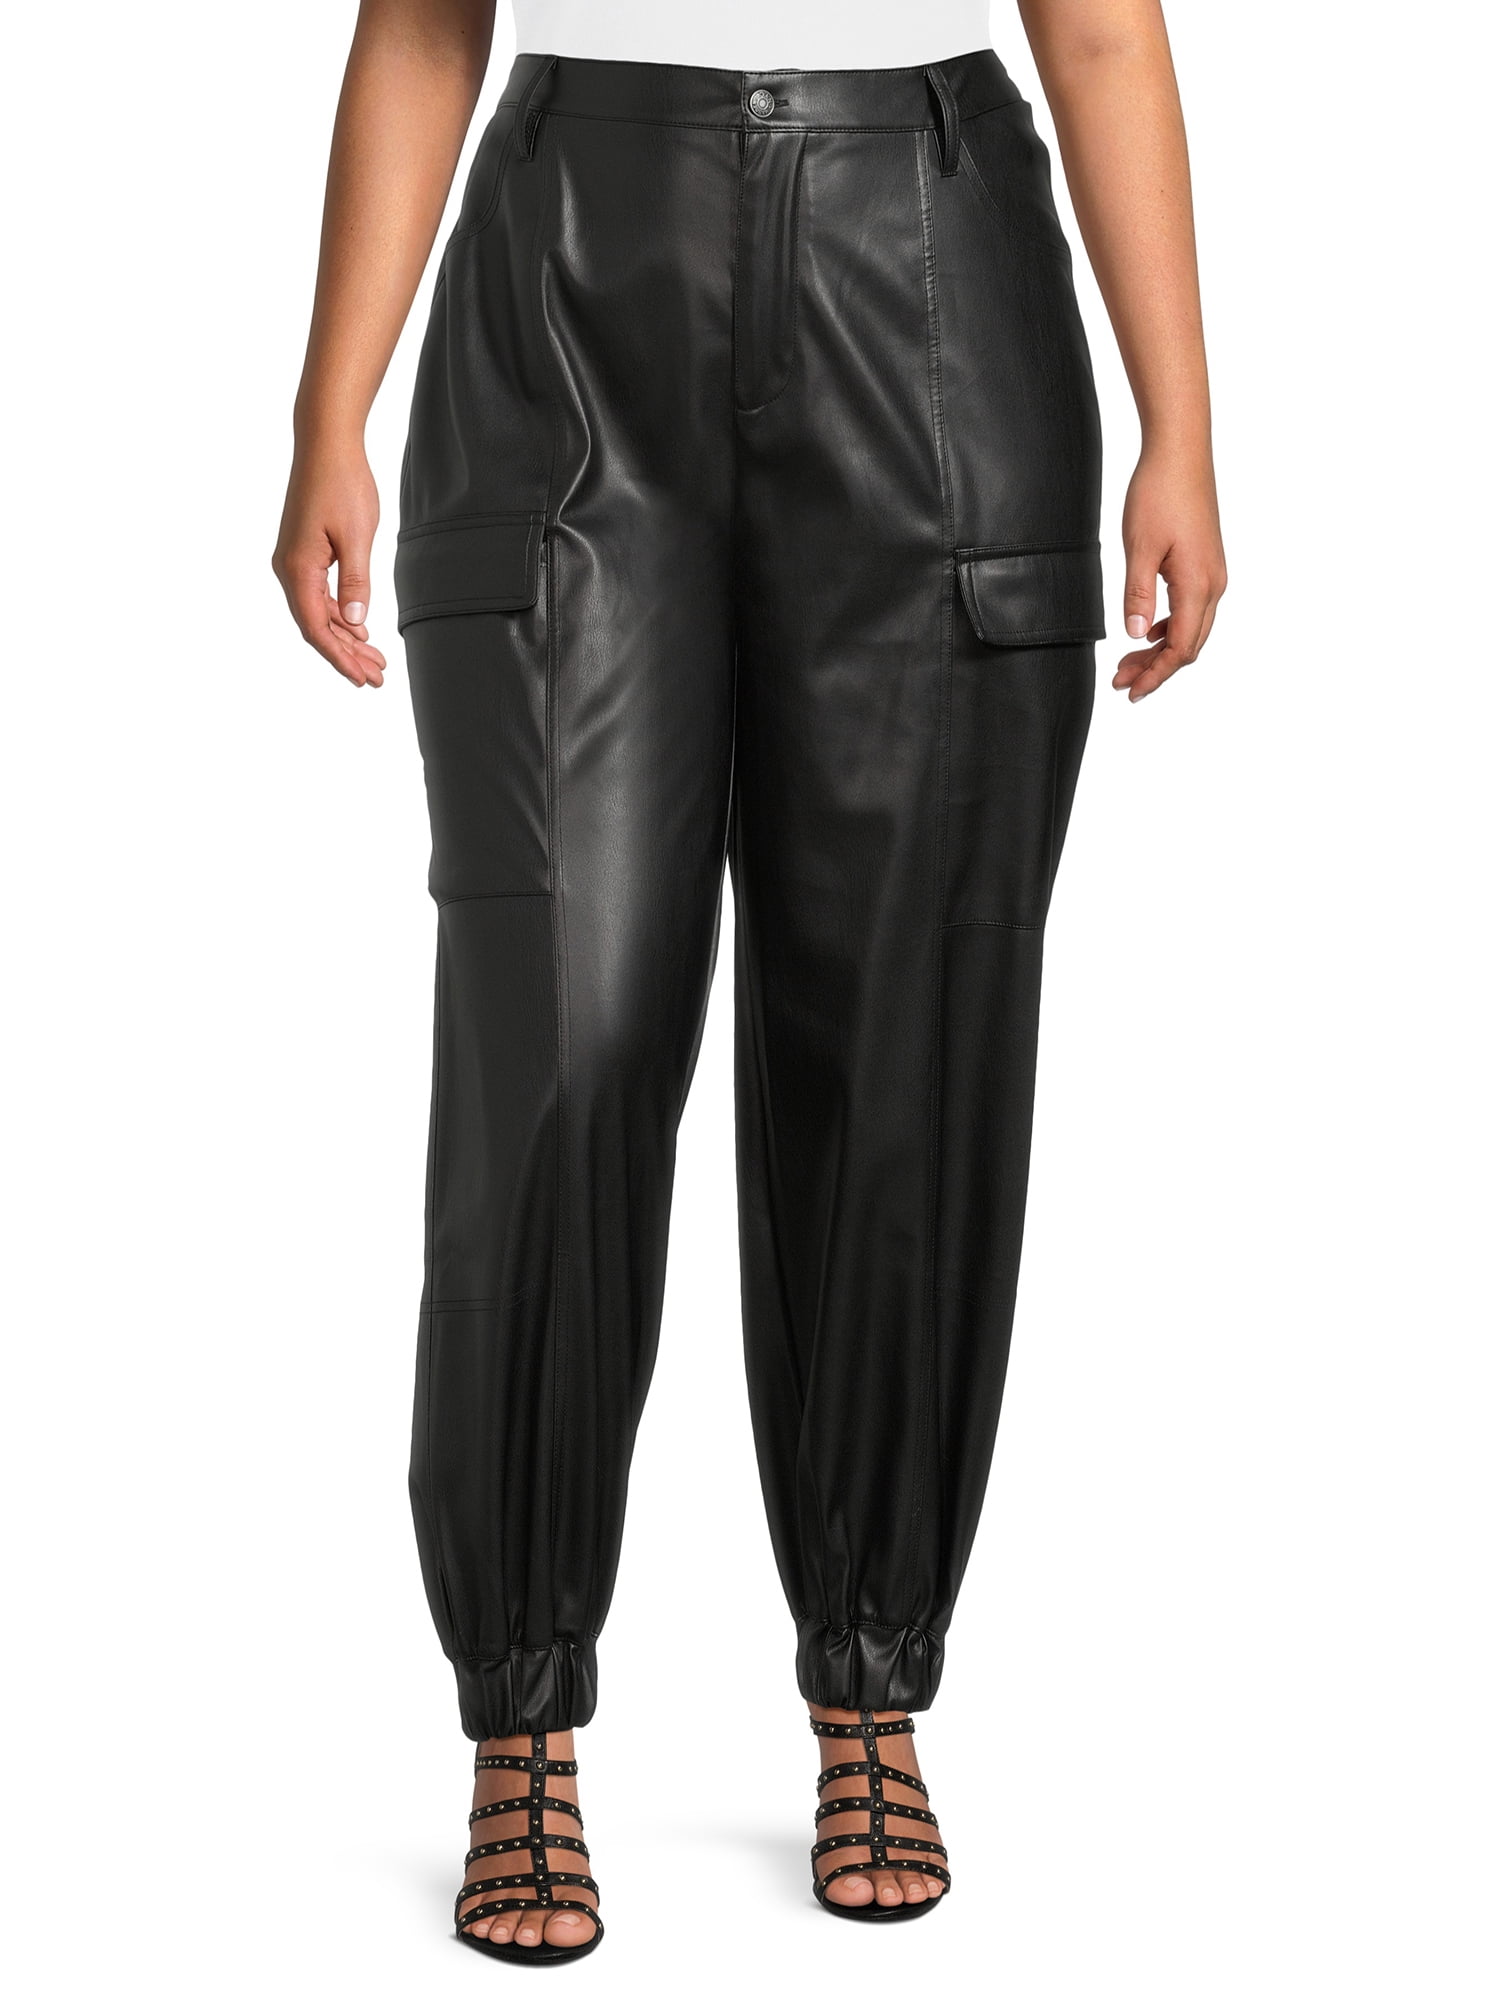 Madden NYC Juniors Plus Size Faux Leather Joggers - Walmart.com